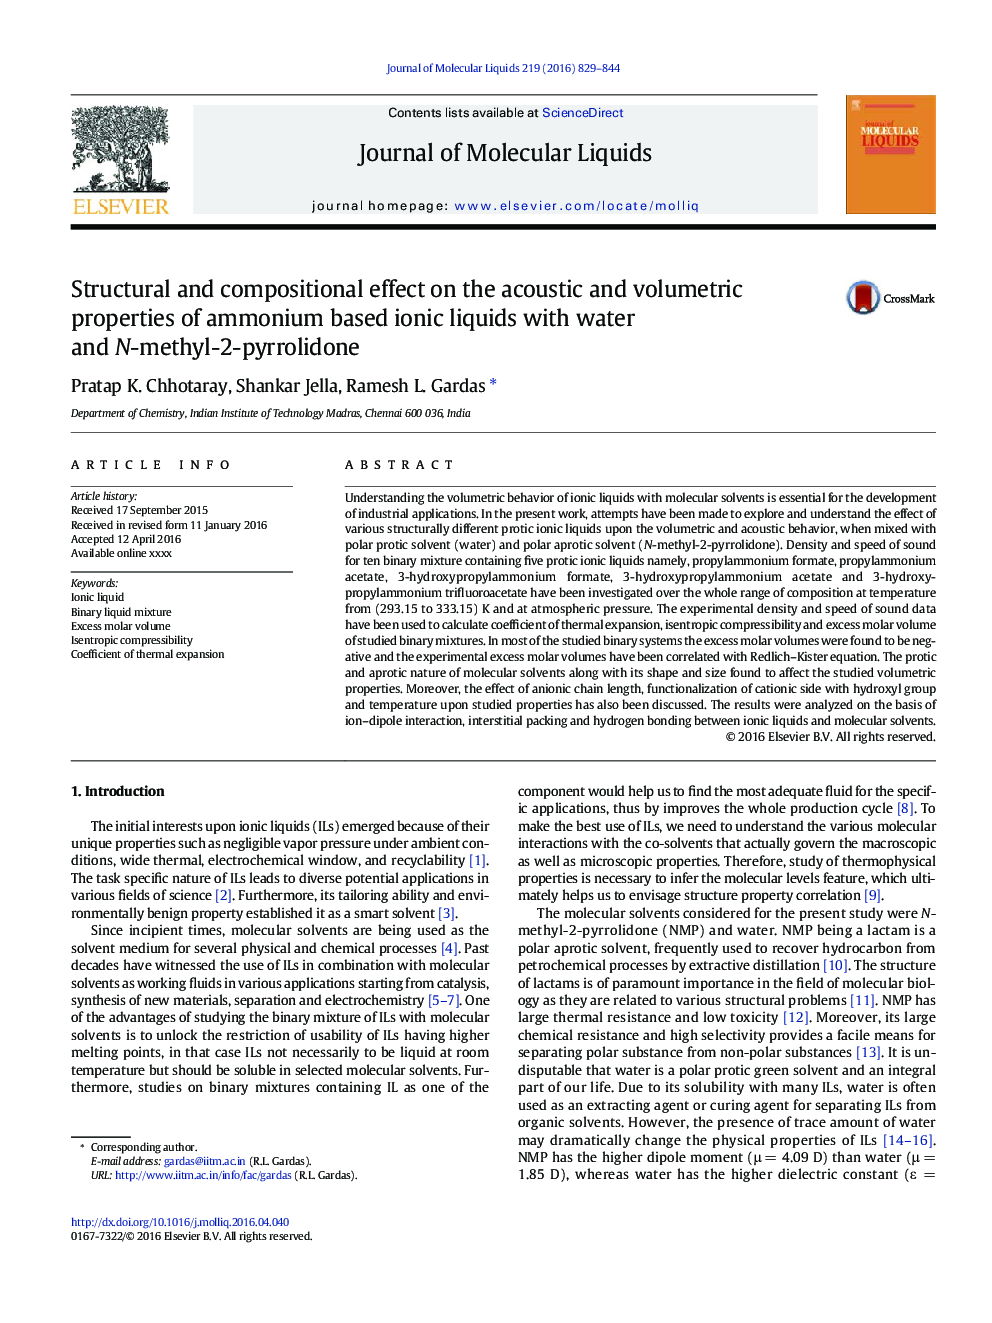 Structural and compositional effect on the acoustic and volumetric properties of ammonium based ionic liquids with water and N-methyl-2-pyrrolidone